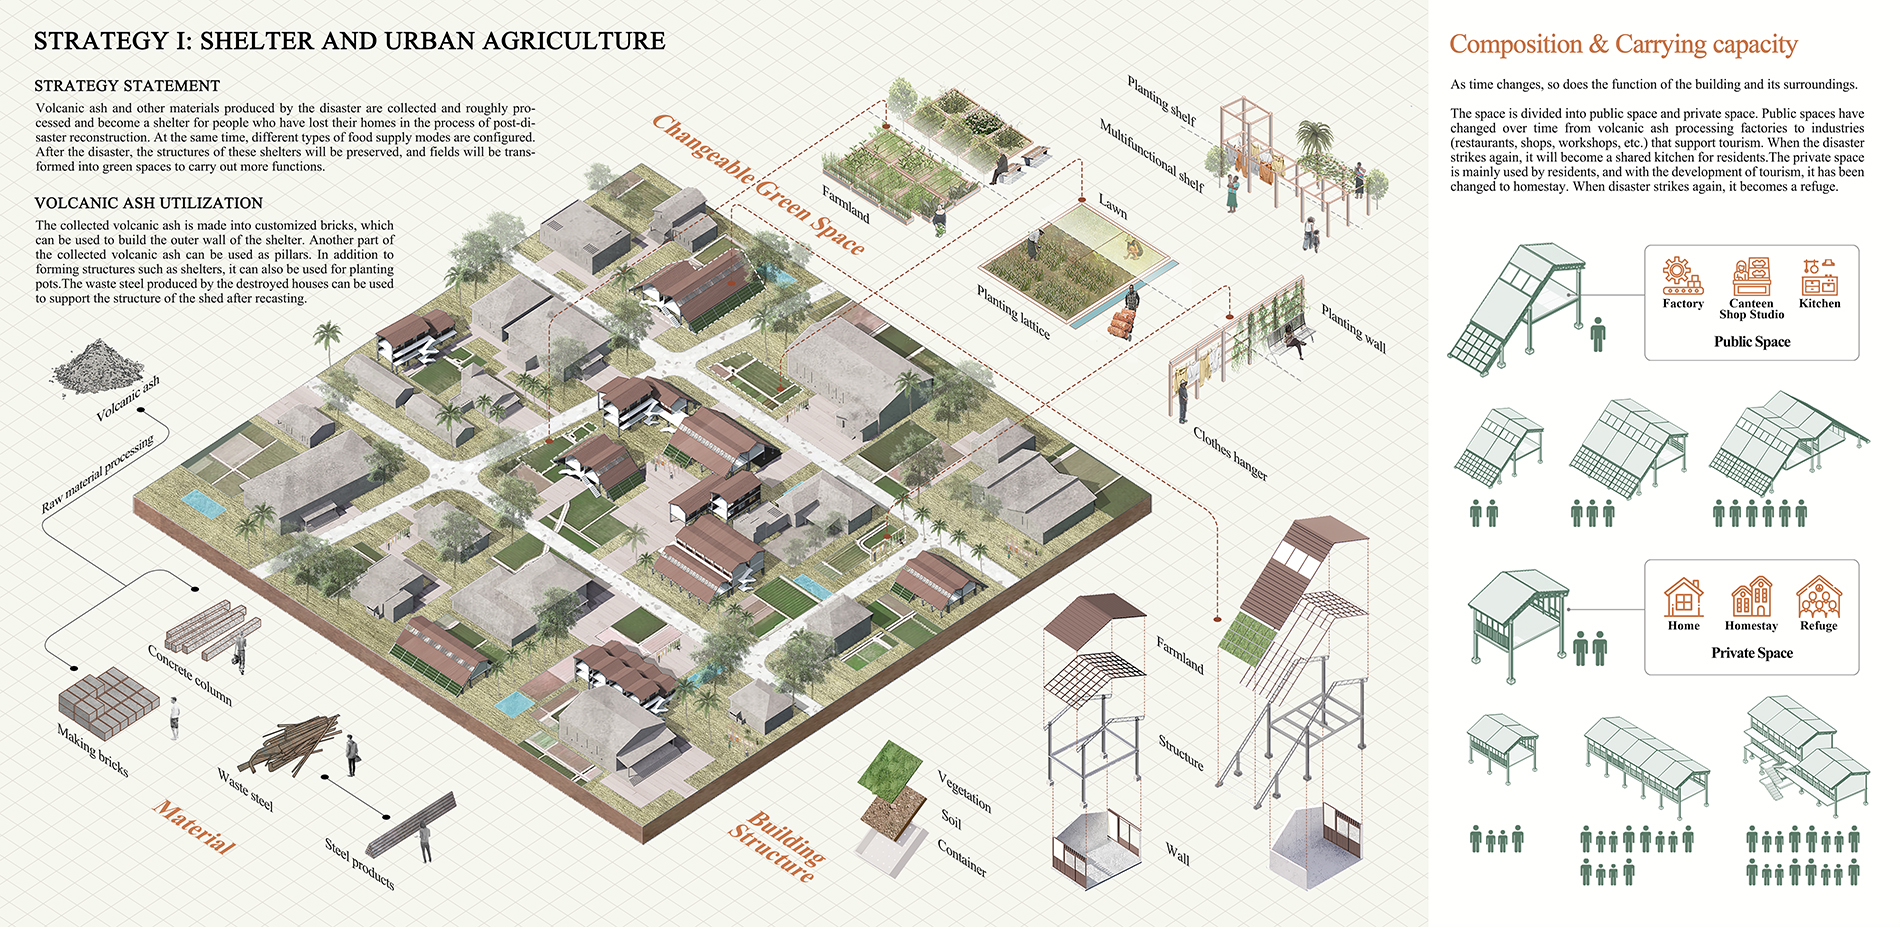 Strategy 1: Shelters and Urban Agriculture